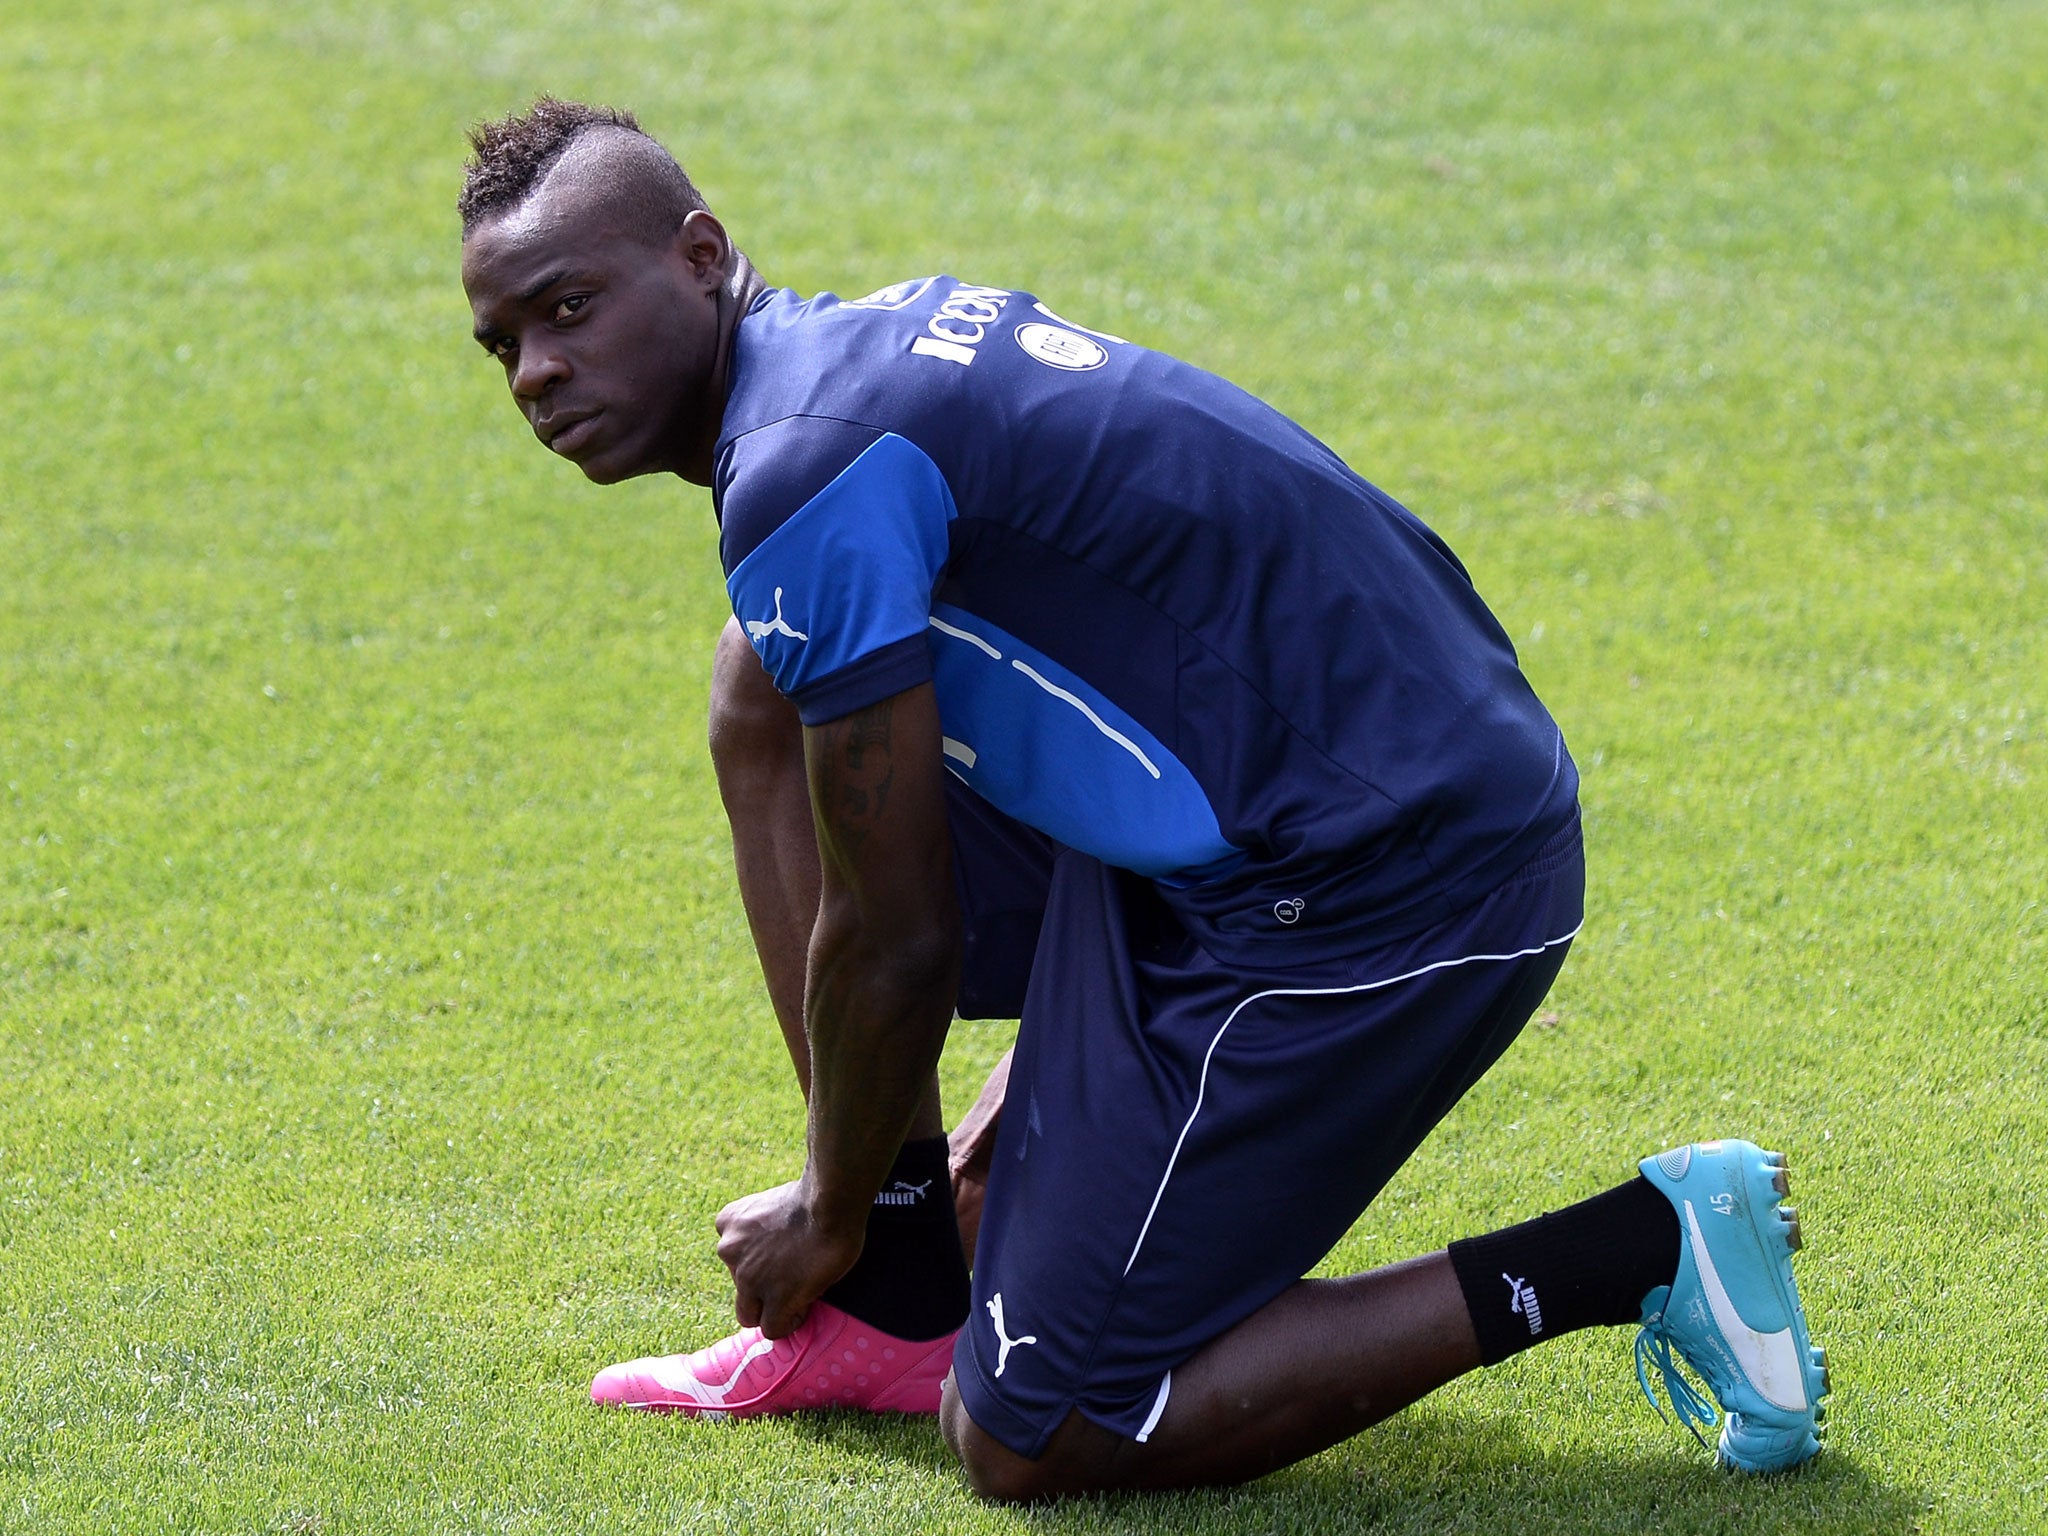 Mario Balotelli of Italy during an Italy training session at Coverciano last week